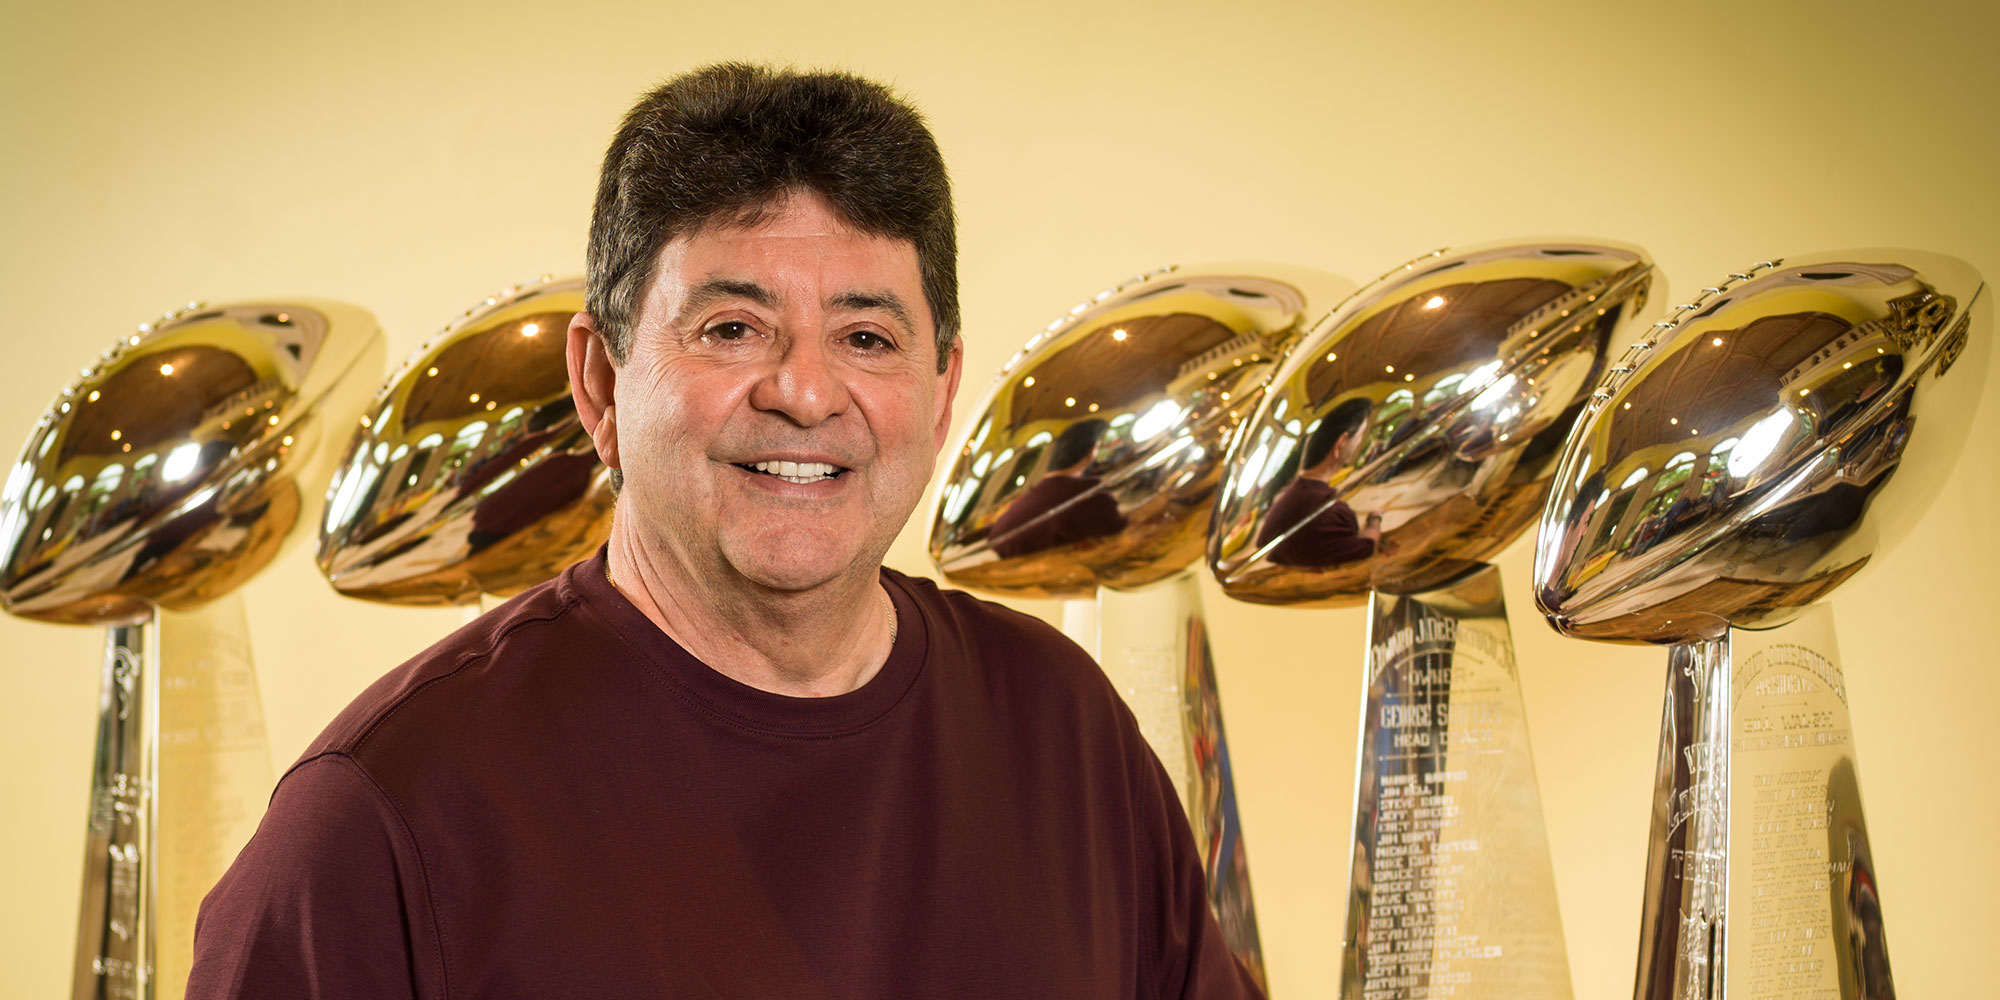 Tampa resident and San Fancisco 49's Hall of Fame Owner, Eddie Debartolo Jr. Posing in his trophy room with his five Lombardi Trophy's, awarded to the Super Bowl Champion.